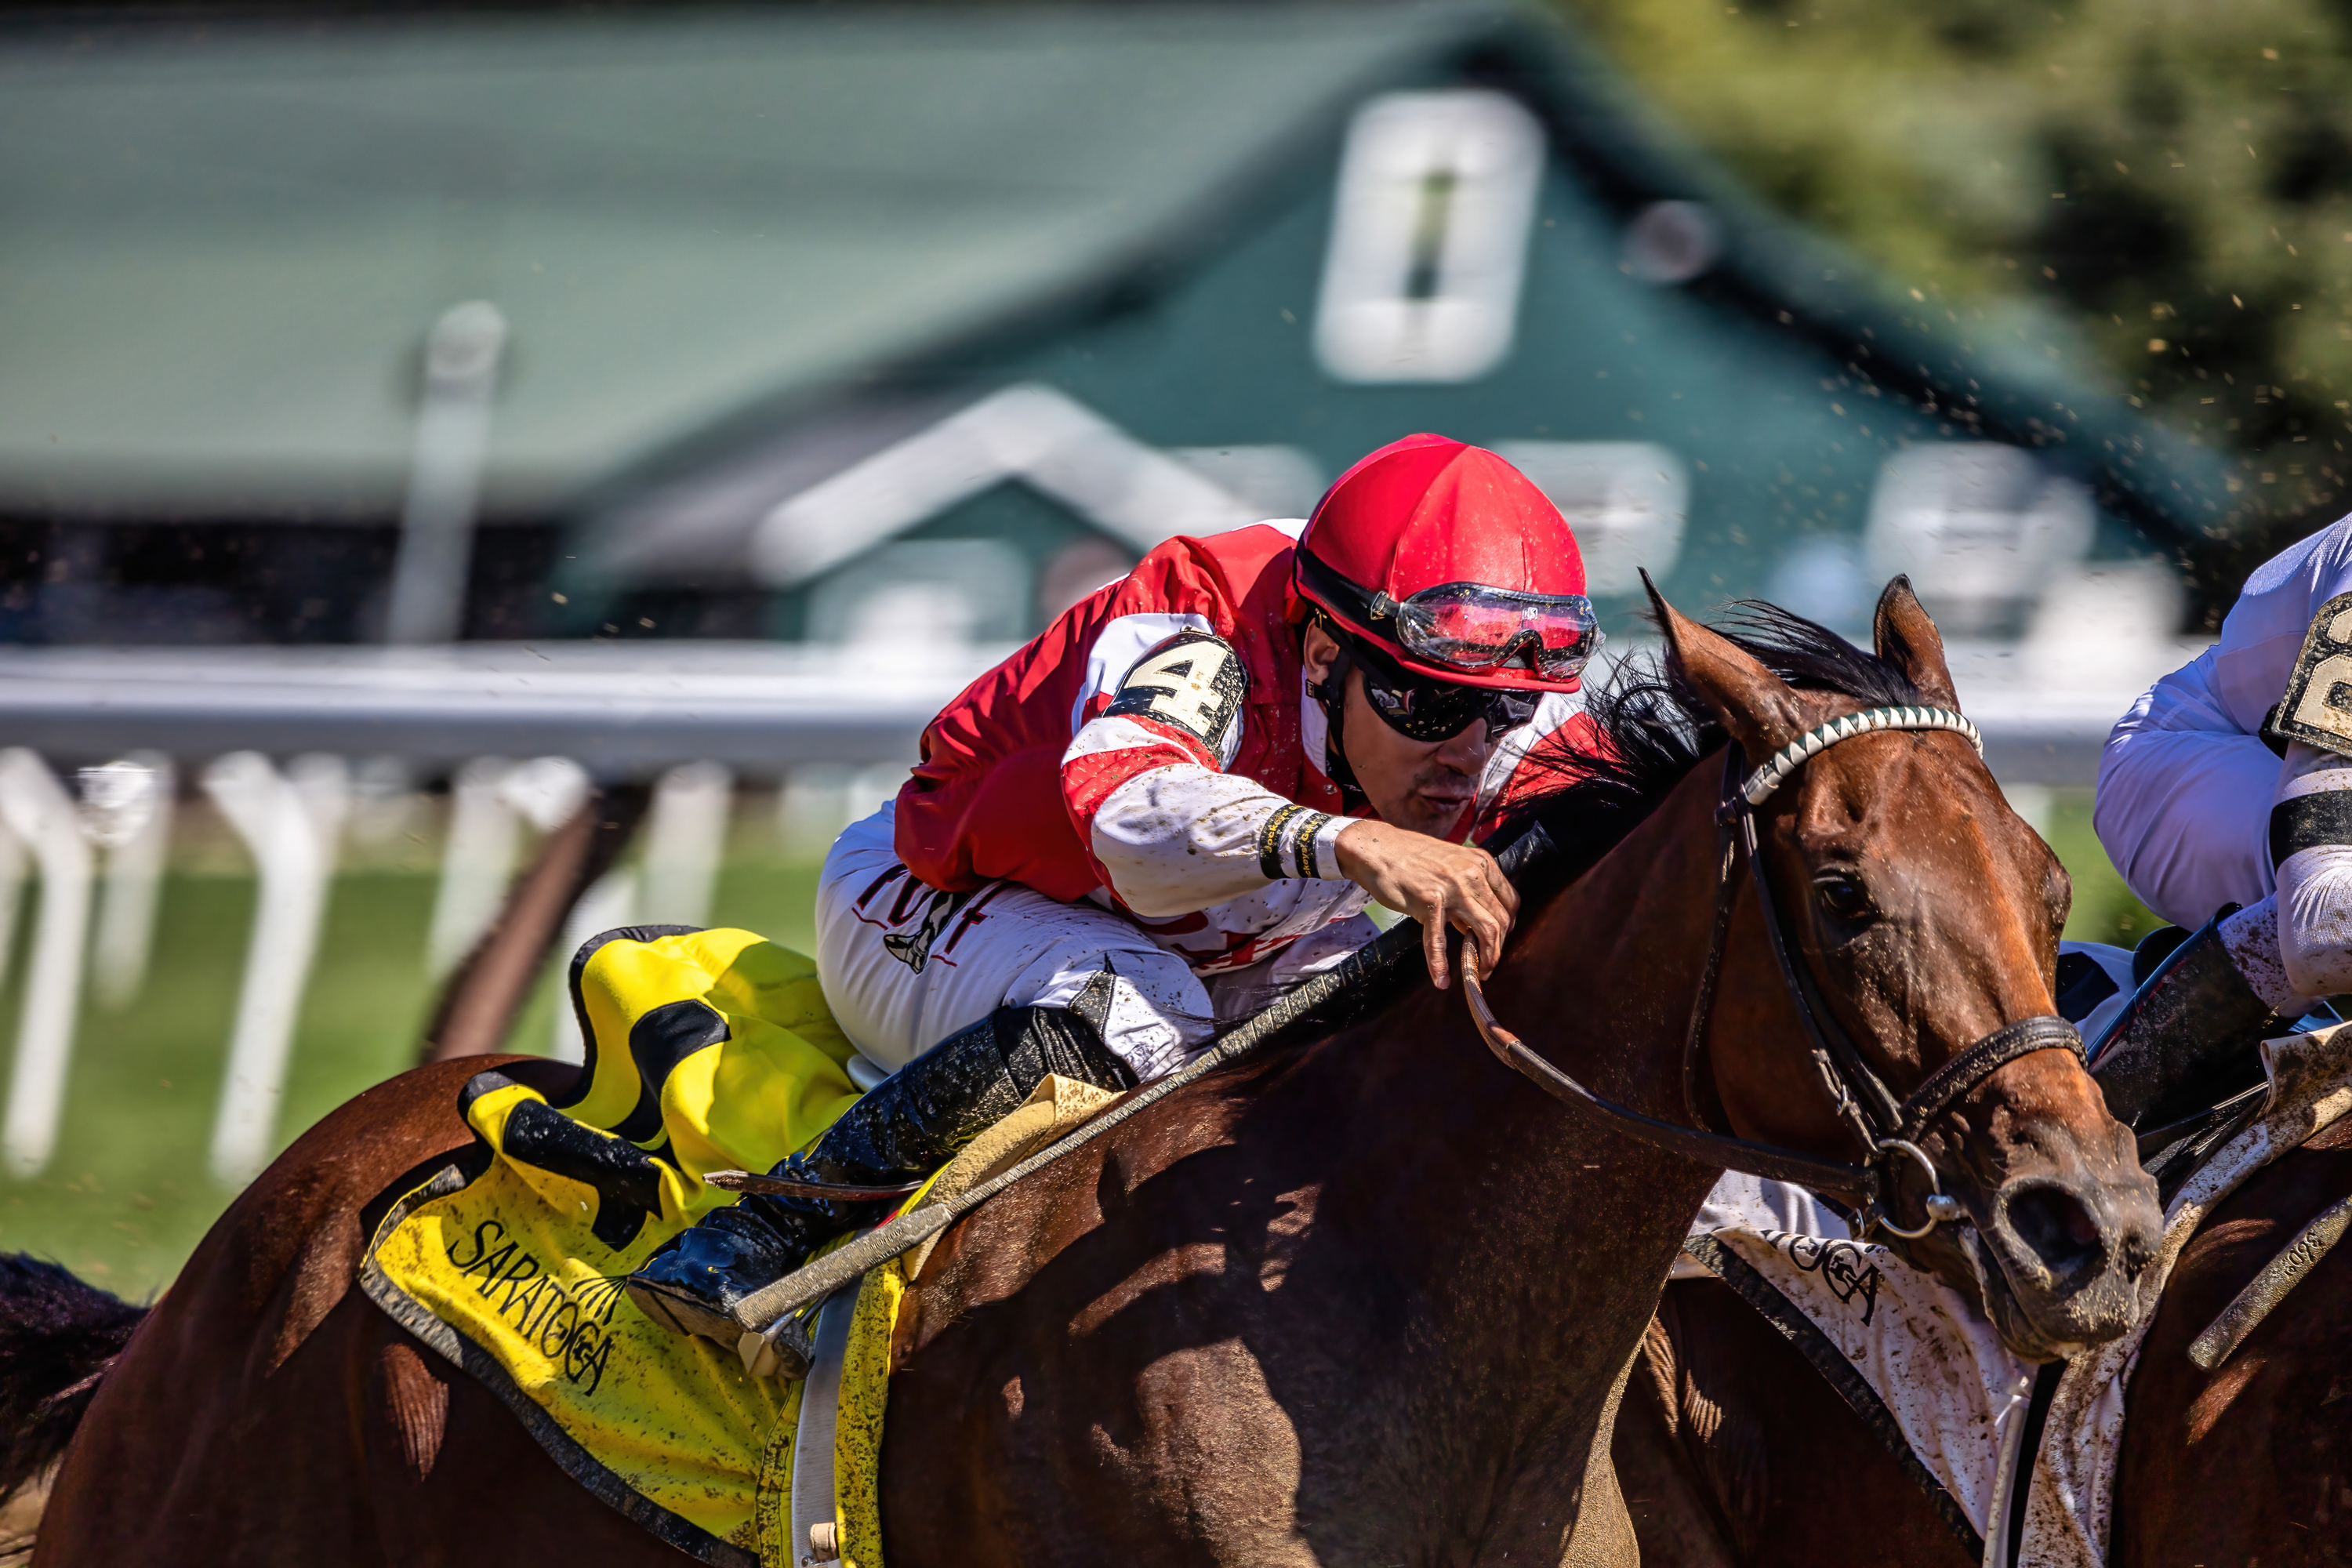 "Red Silks #4" (Saratoga Race Course, Saratoga Springs, NY - July/August 2022 Season), photograph by Marc Jacobs	